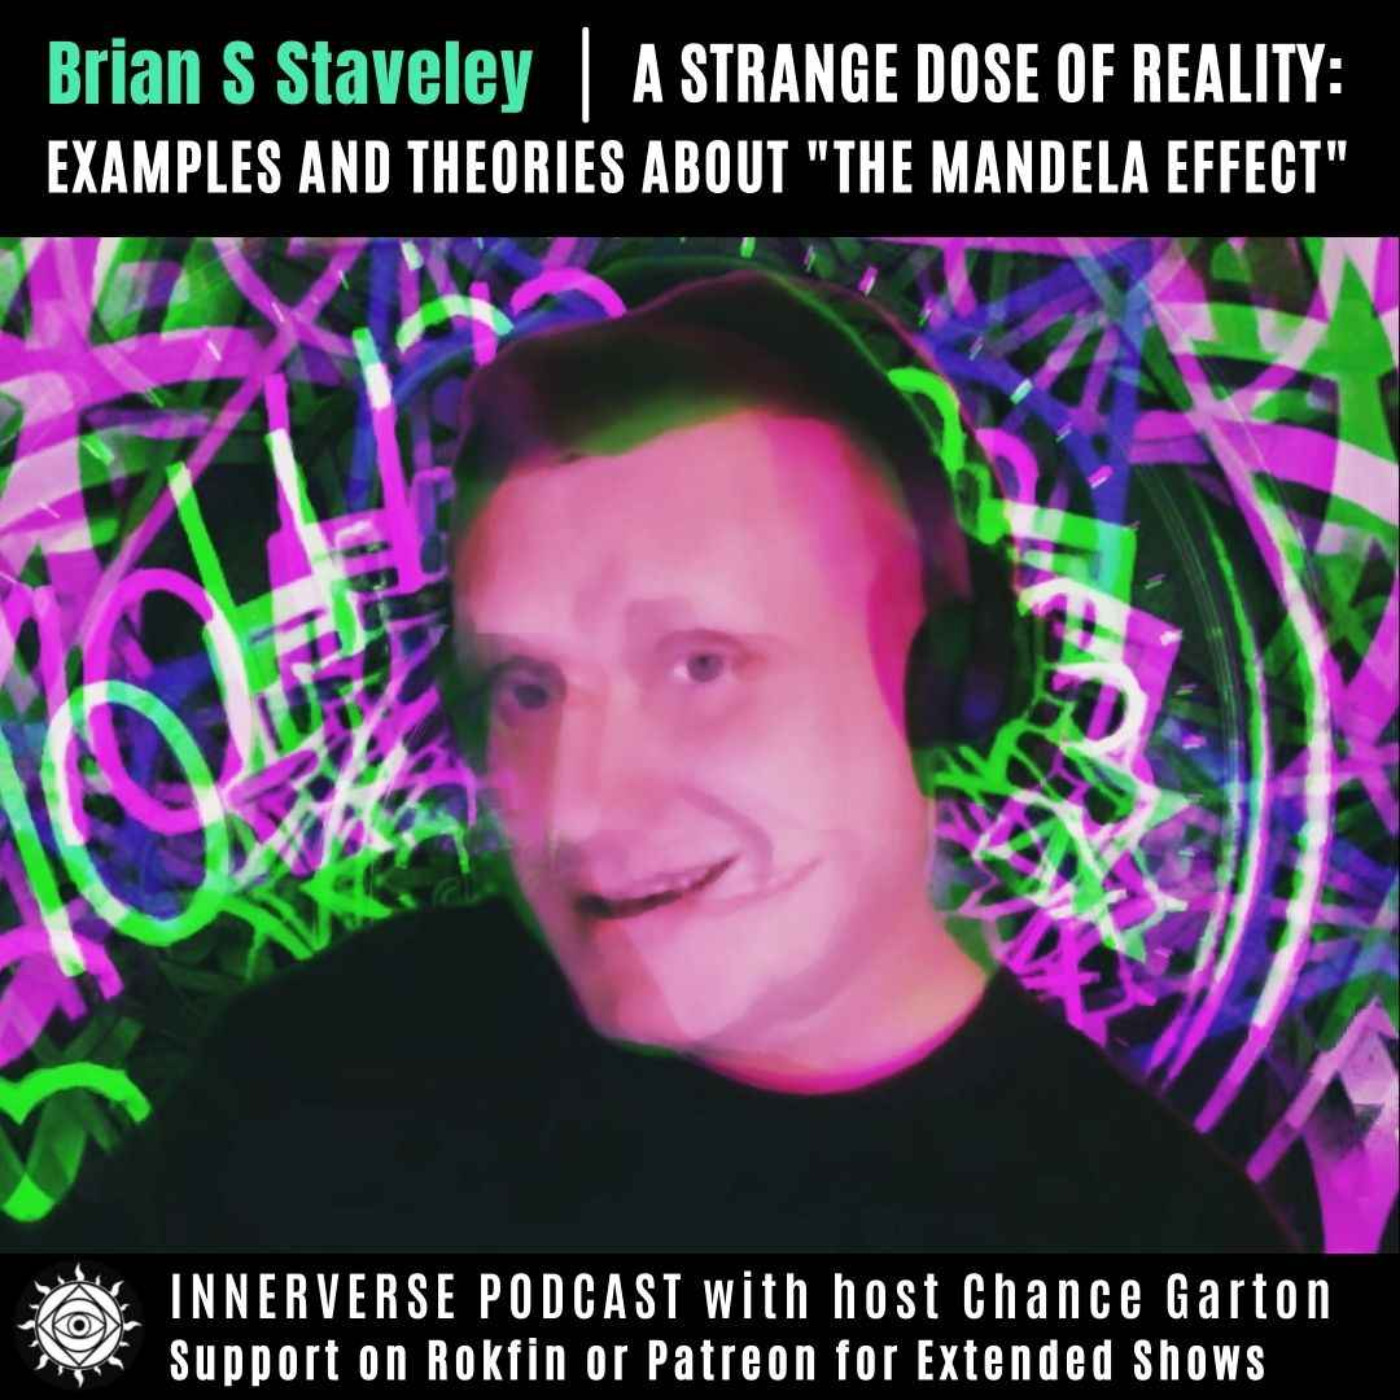 Brian S. Staveley | A Strange Dose of Reality: Examples and Theories About "The Mandela Effect"